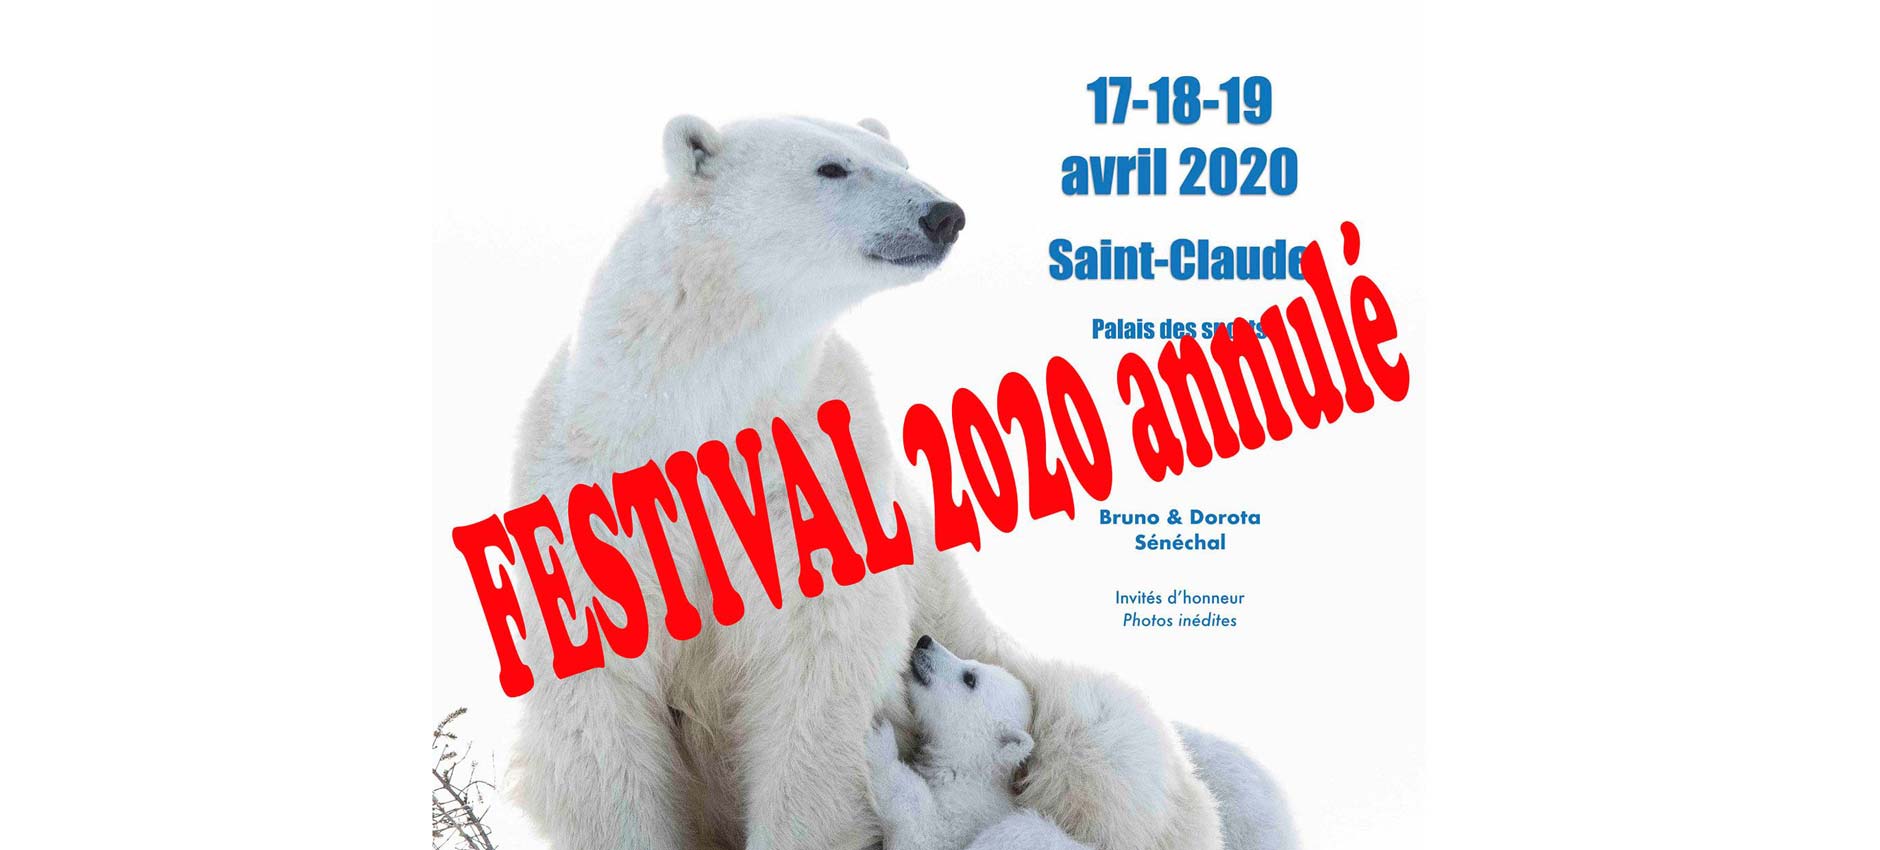 April May June 2020 - 6 Festivals cancelled